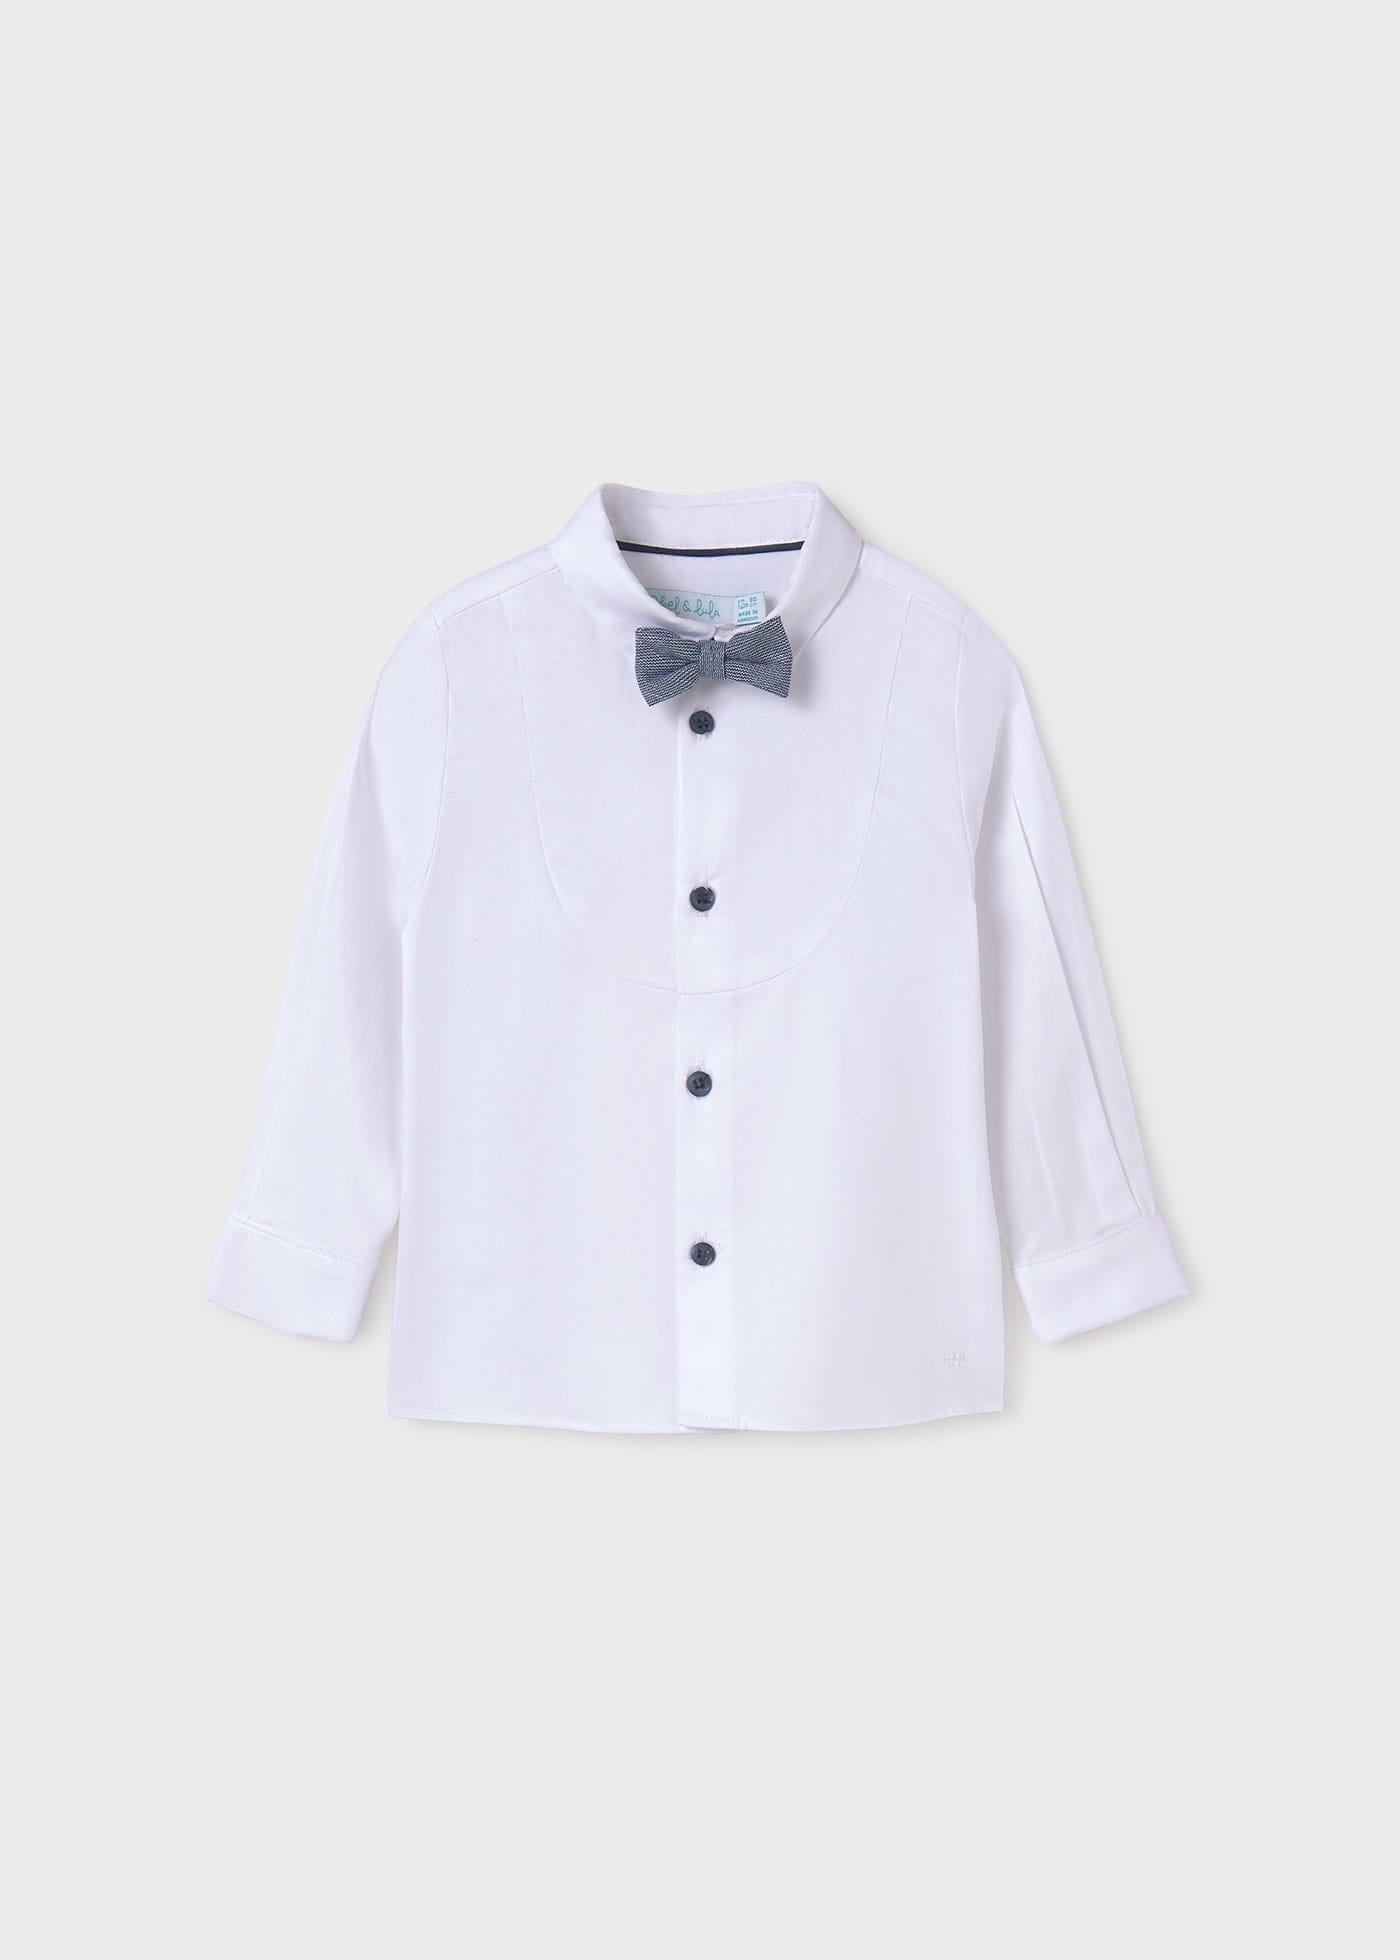 Baby bow tie shirt